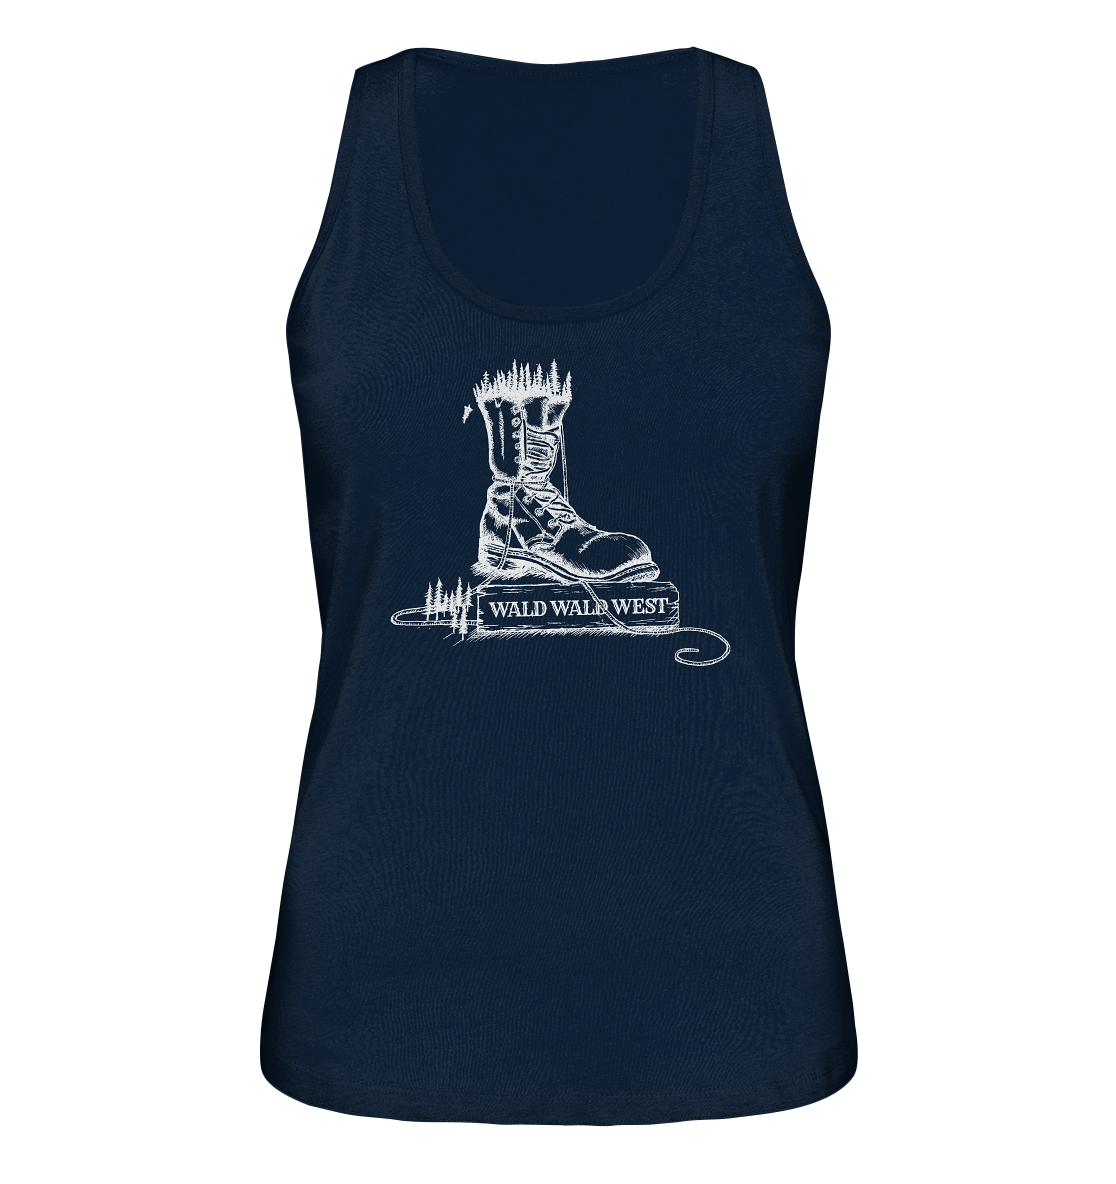 front-ladies-organic-tank-top-0e2035-1116x.png